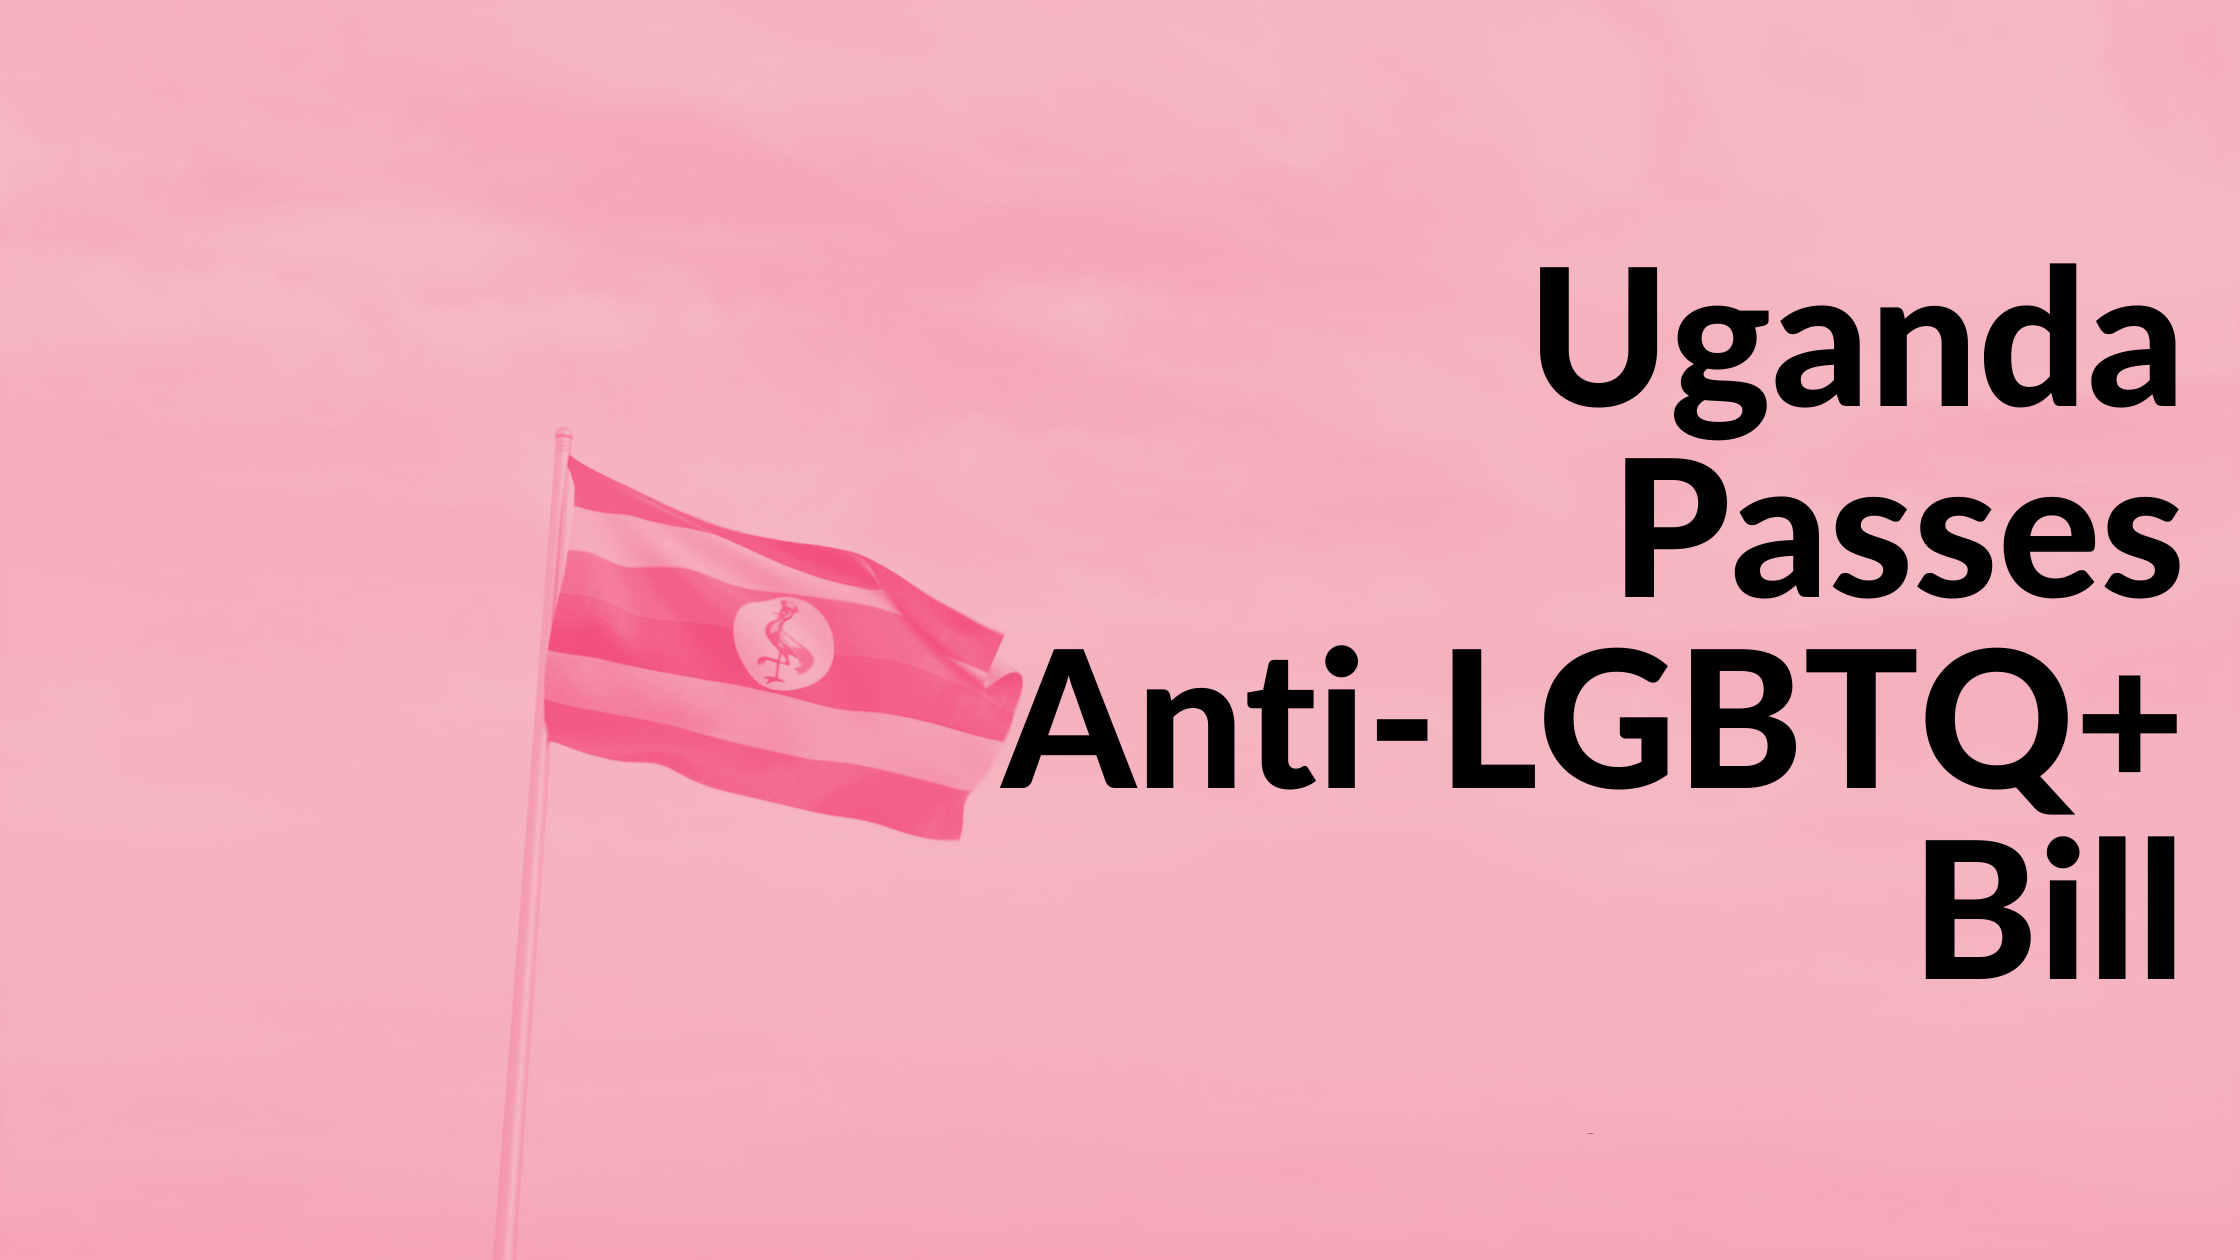 Text "Uganda Passes Anti-LGBTQ+ Bill" against a background of a Ugandan flag blowing in the sky but all the colours have been adjusted to shades of Pink